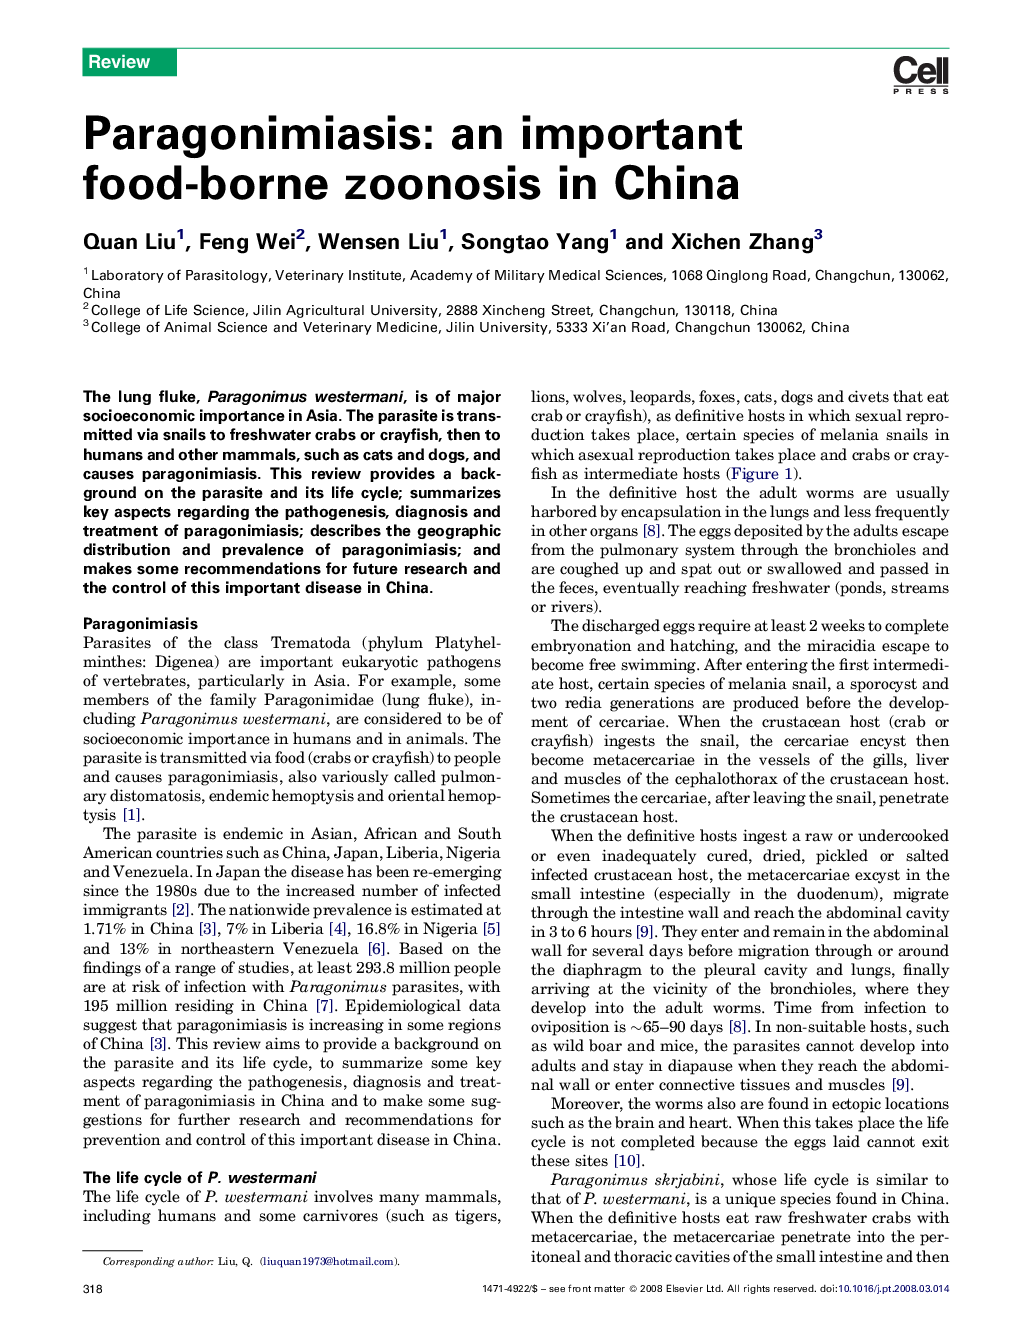 Paragonimiasis: an important food-borne zoonosis in China